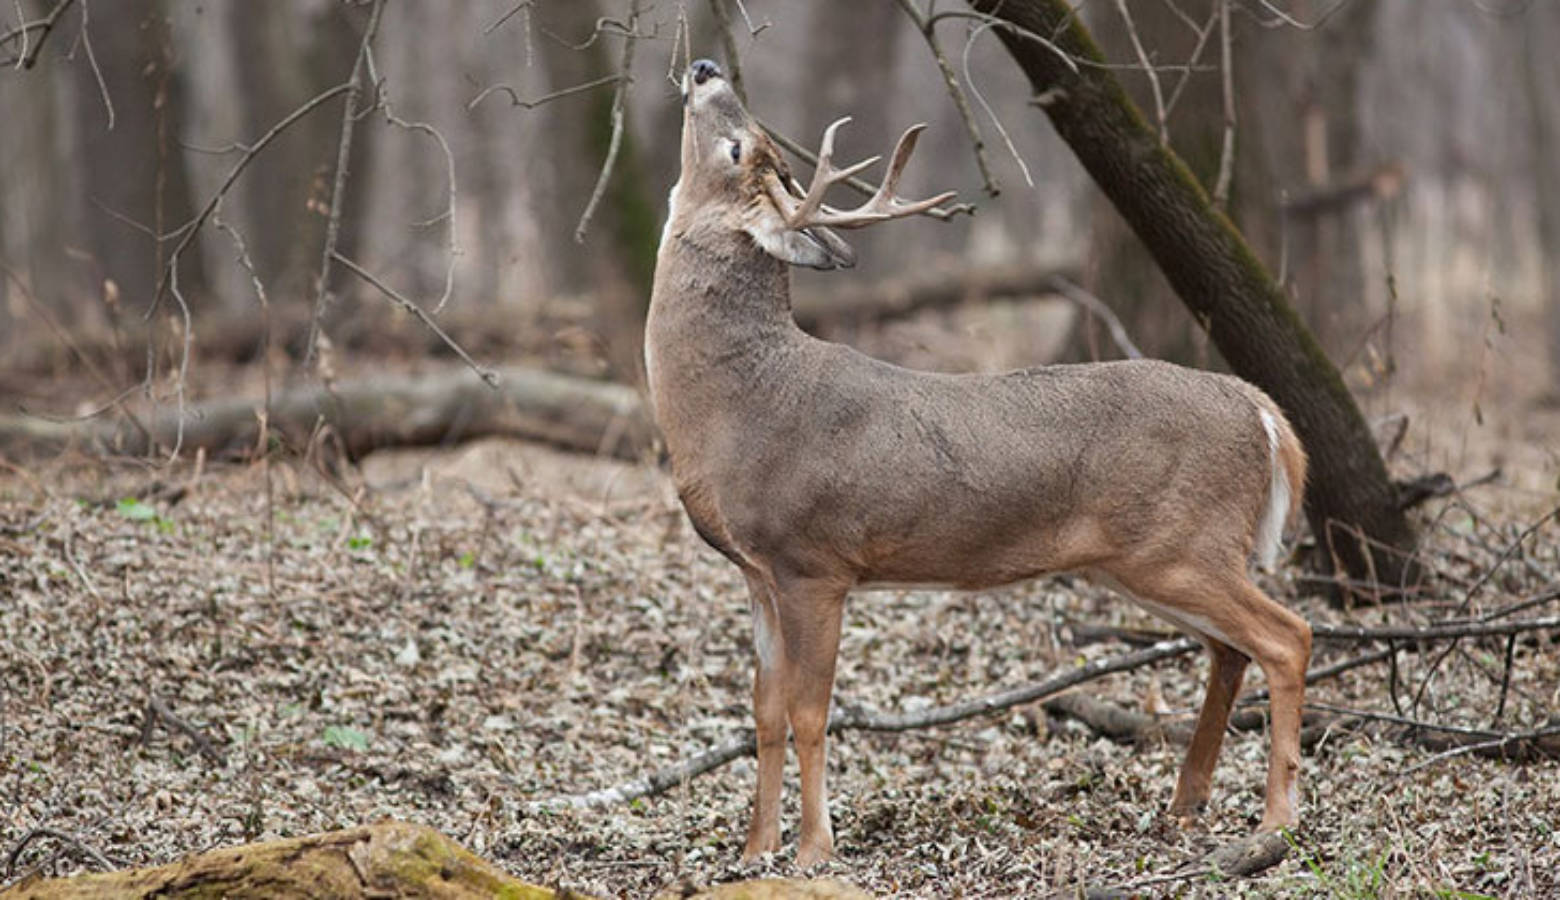 Seventeen Indiana state park sites will close temporarily on Nov. 18-19 and Dec. 2-3 for a pair of controlled deer hunts.